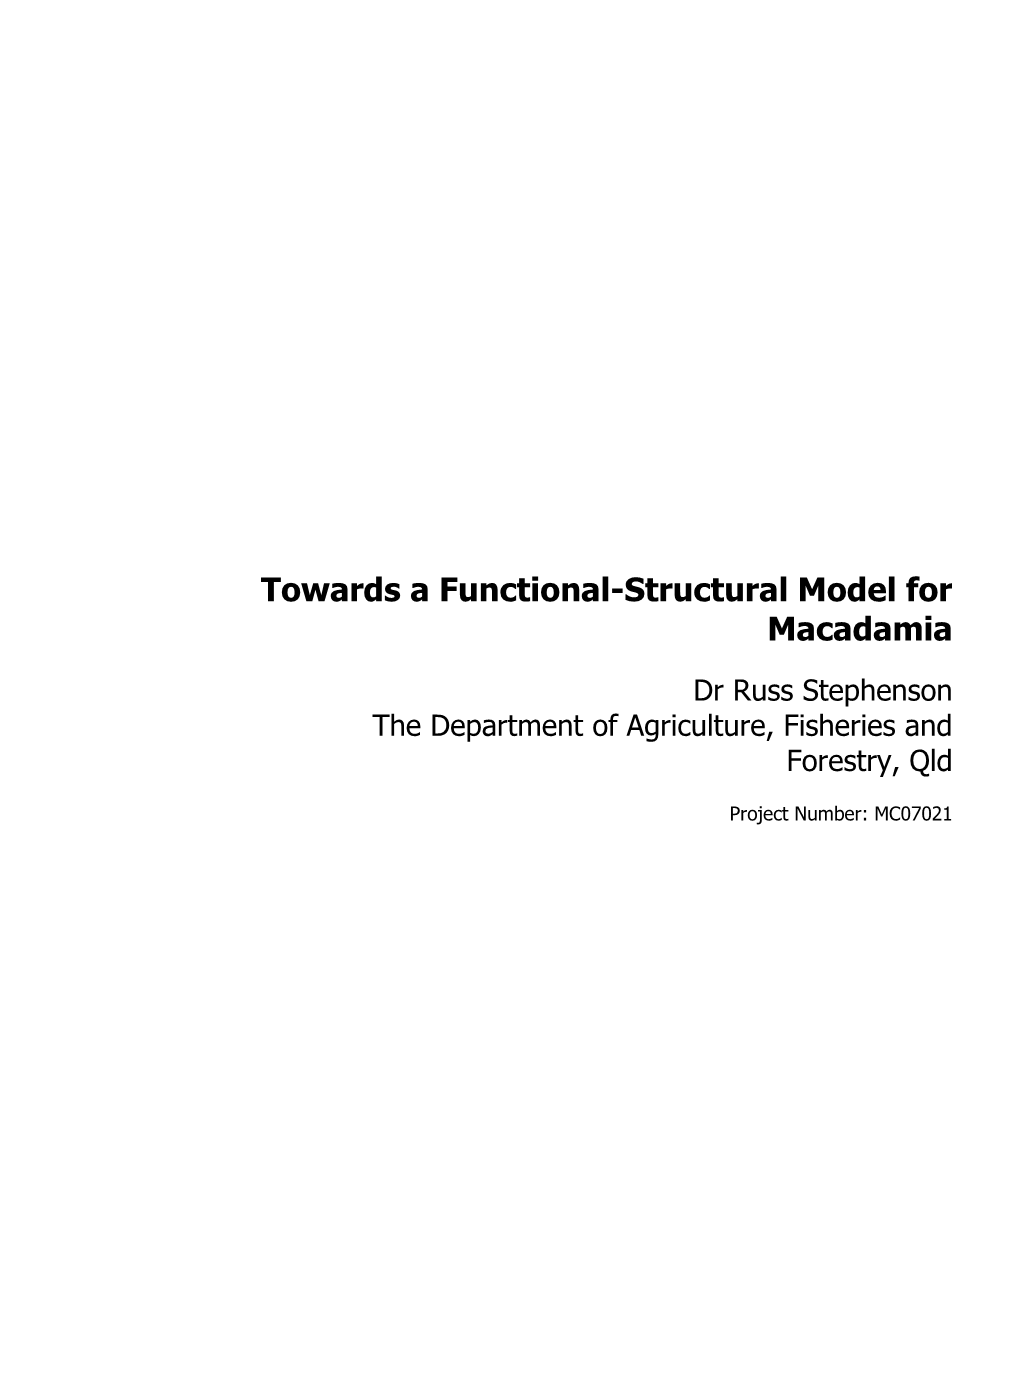 Towards a Functional-Structural Model for Macadamia